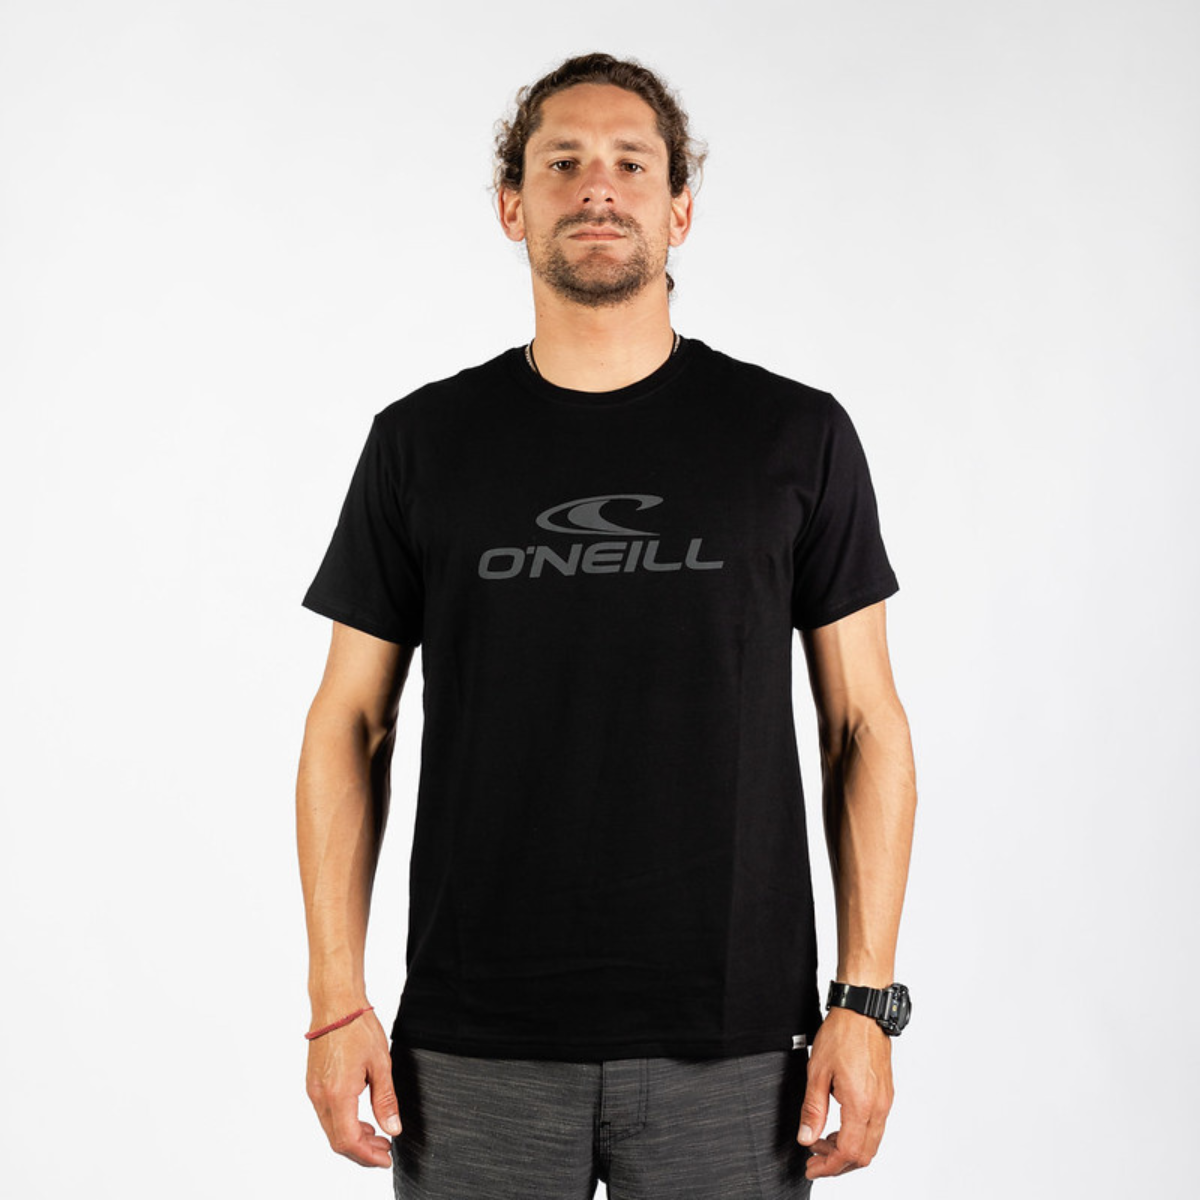 POLO M/C - LM O´NEILL T-SHIRT - BLACK OUT - 3X119